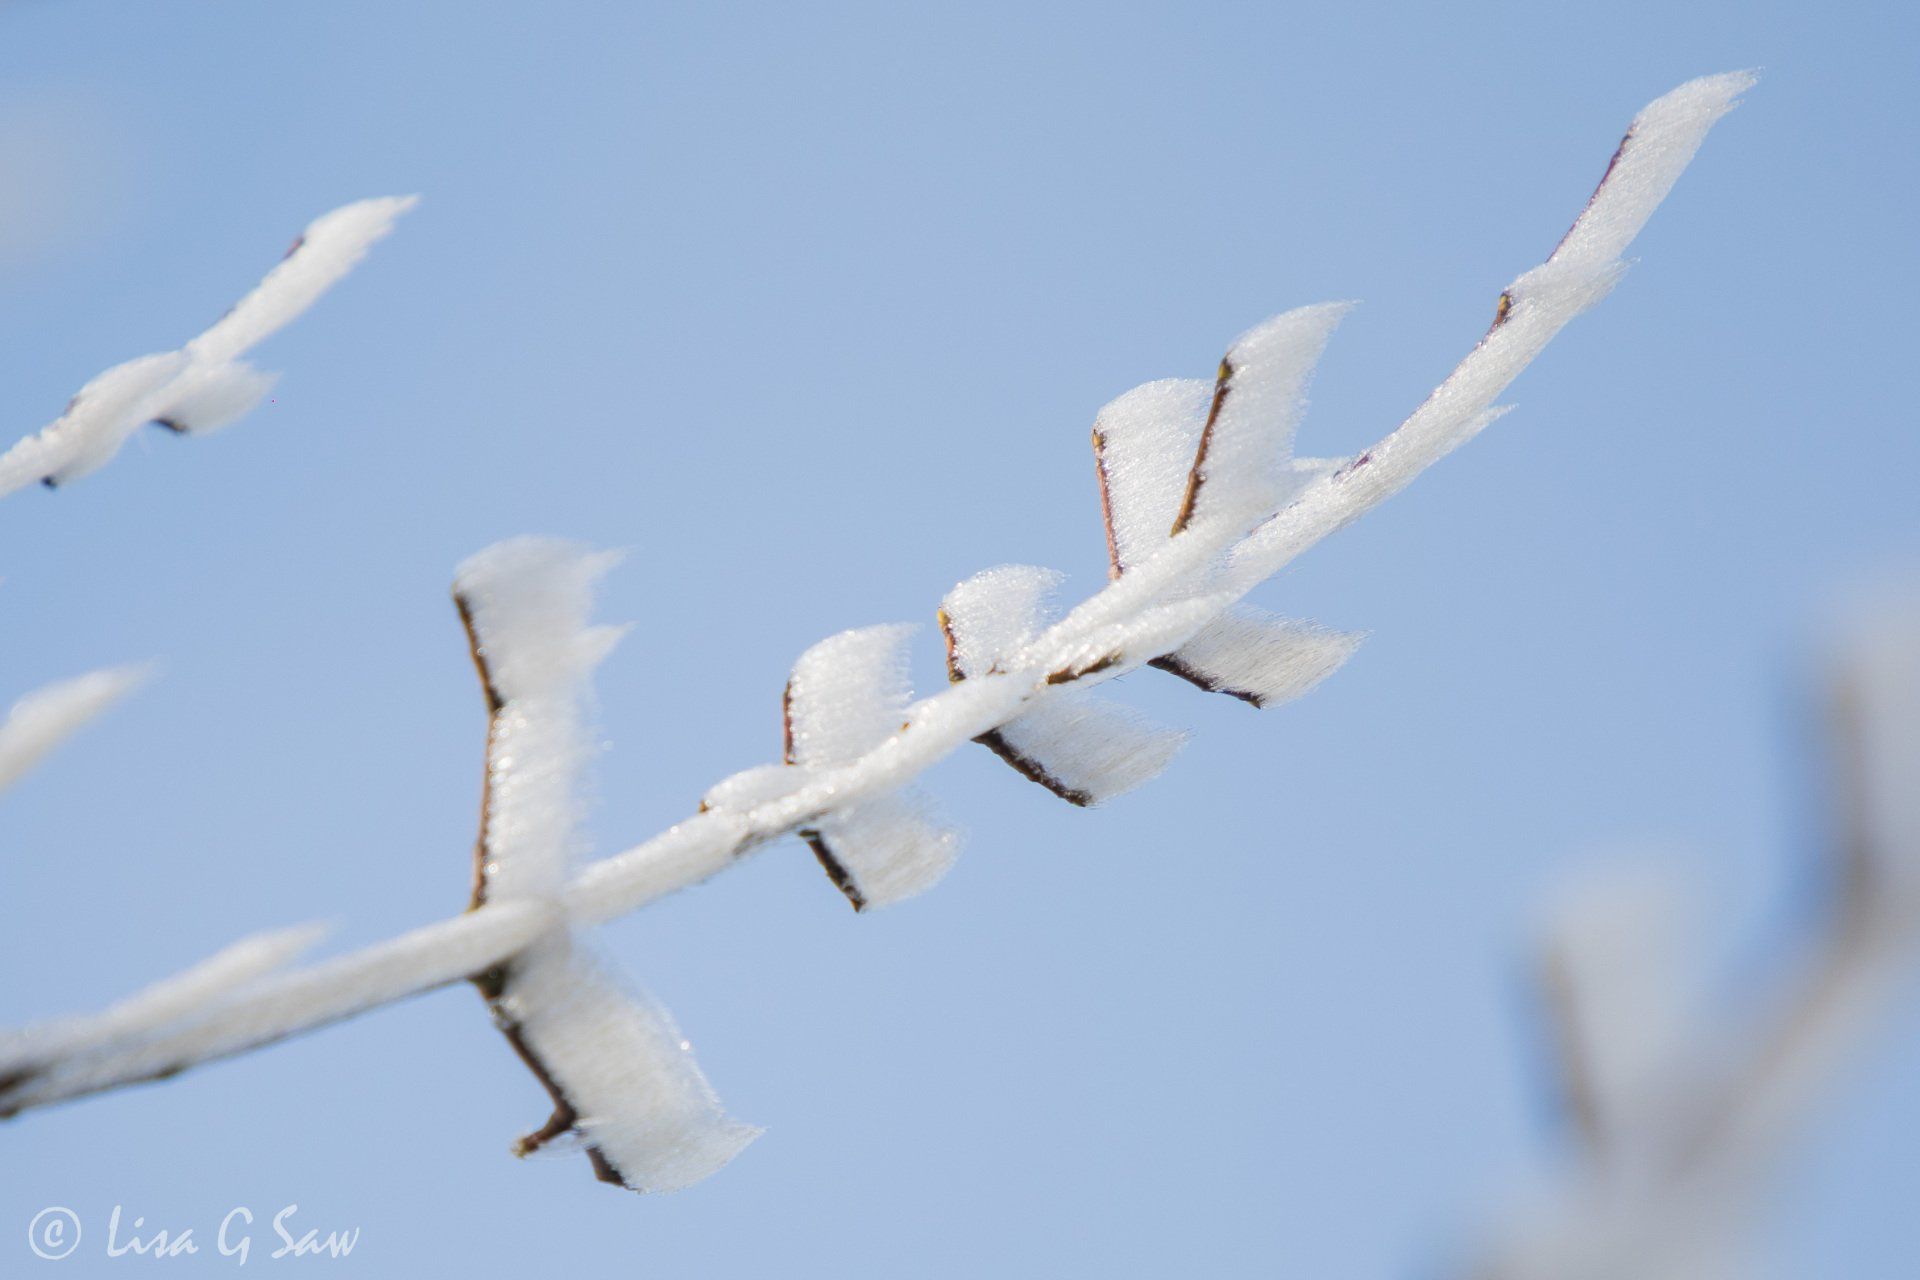 Hoar frost on branch with blue sky